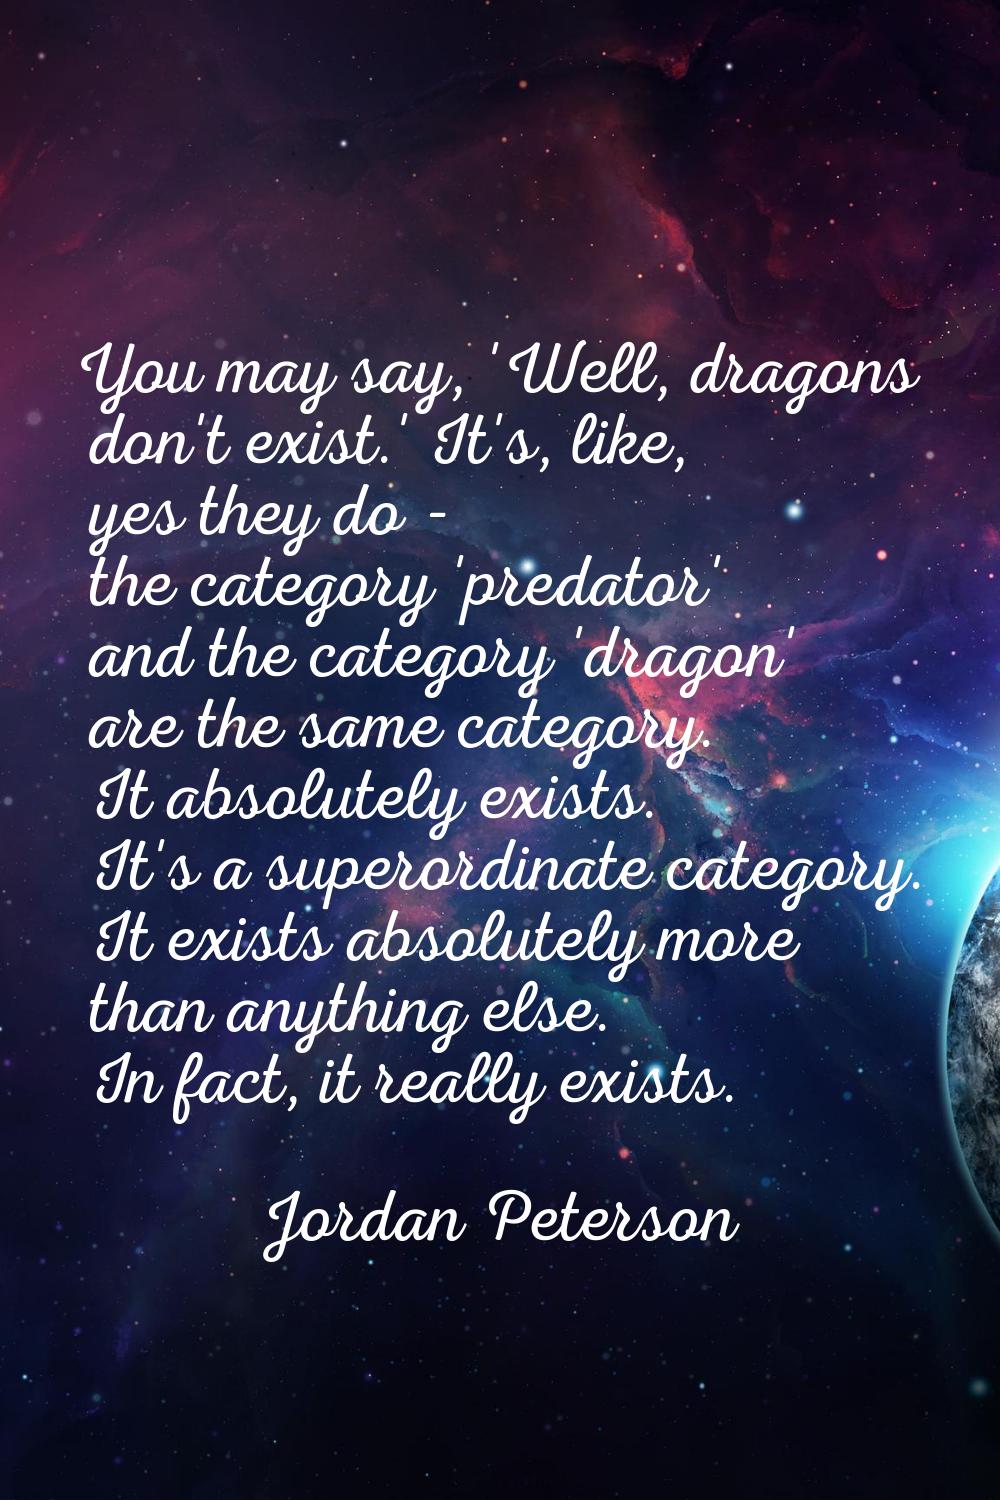 You may say, 'Well, dragons don't exist.' It's, like, yes they do - the category 'predator' and the